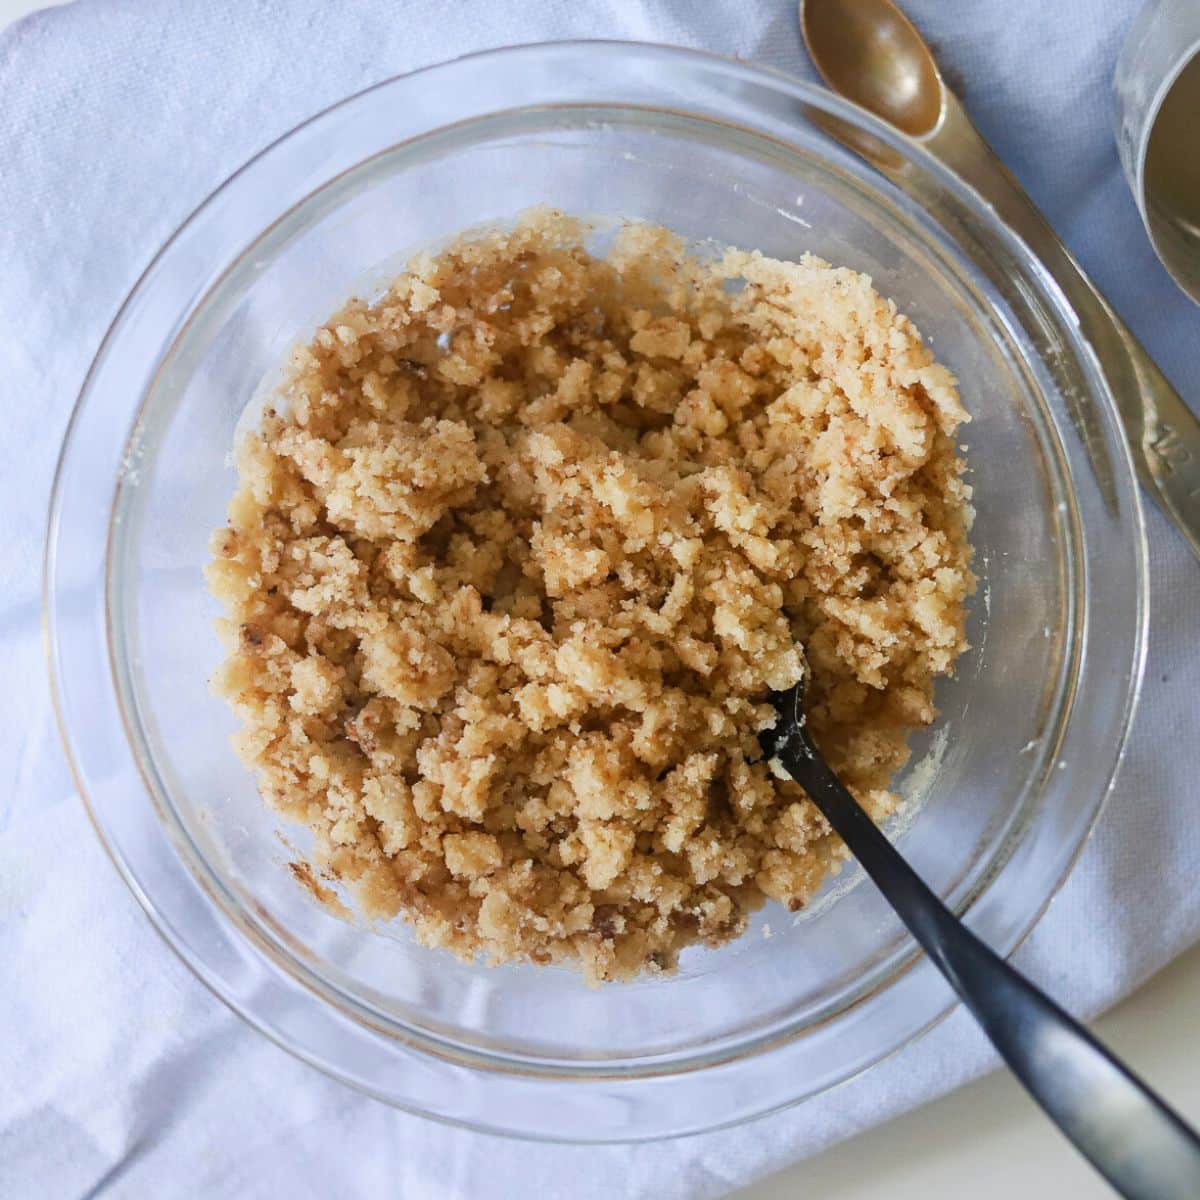 a glass bowl filled with an uncooked crumble topping and a black utensil.